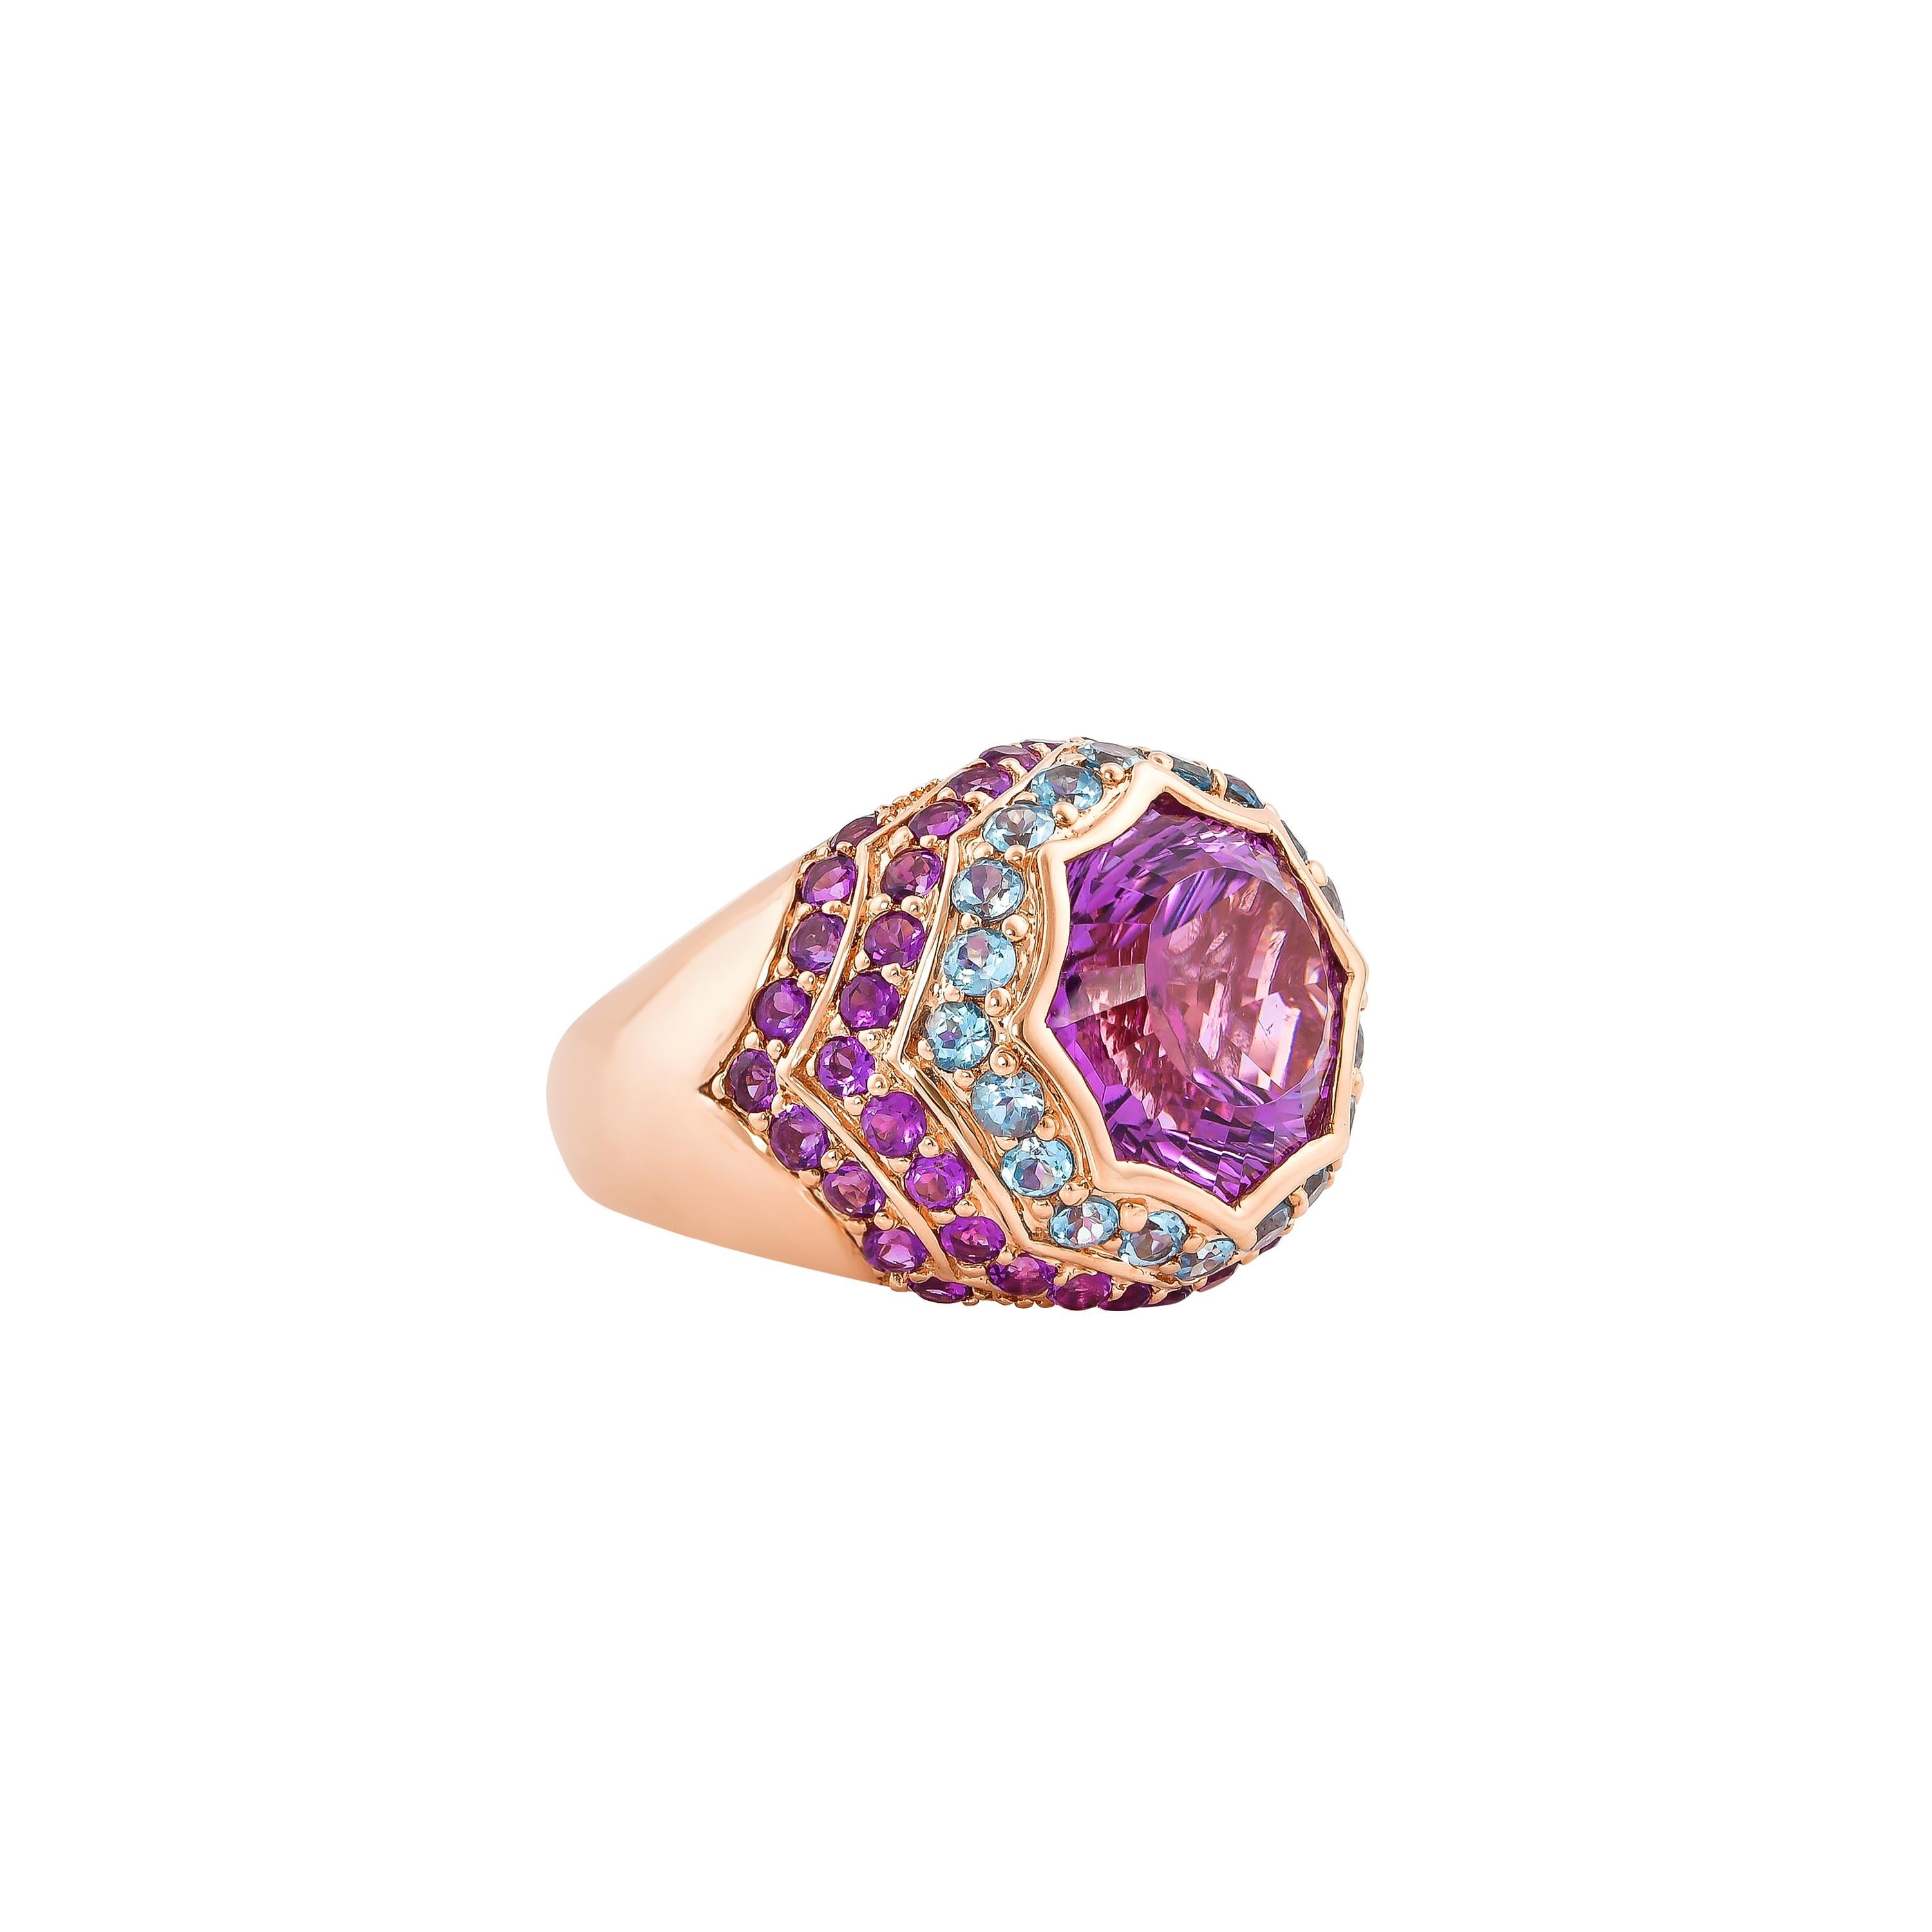 Sunita Nahata presents a collection of alluring amethyst cocktail rings. Amethysts are particularly known to bring powerful energies to Aquarians or those born in February. In general it is said to calm and de-stress wearers, and alleviate all